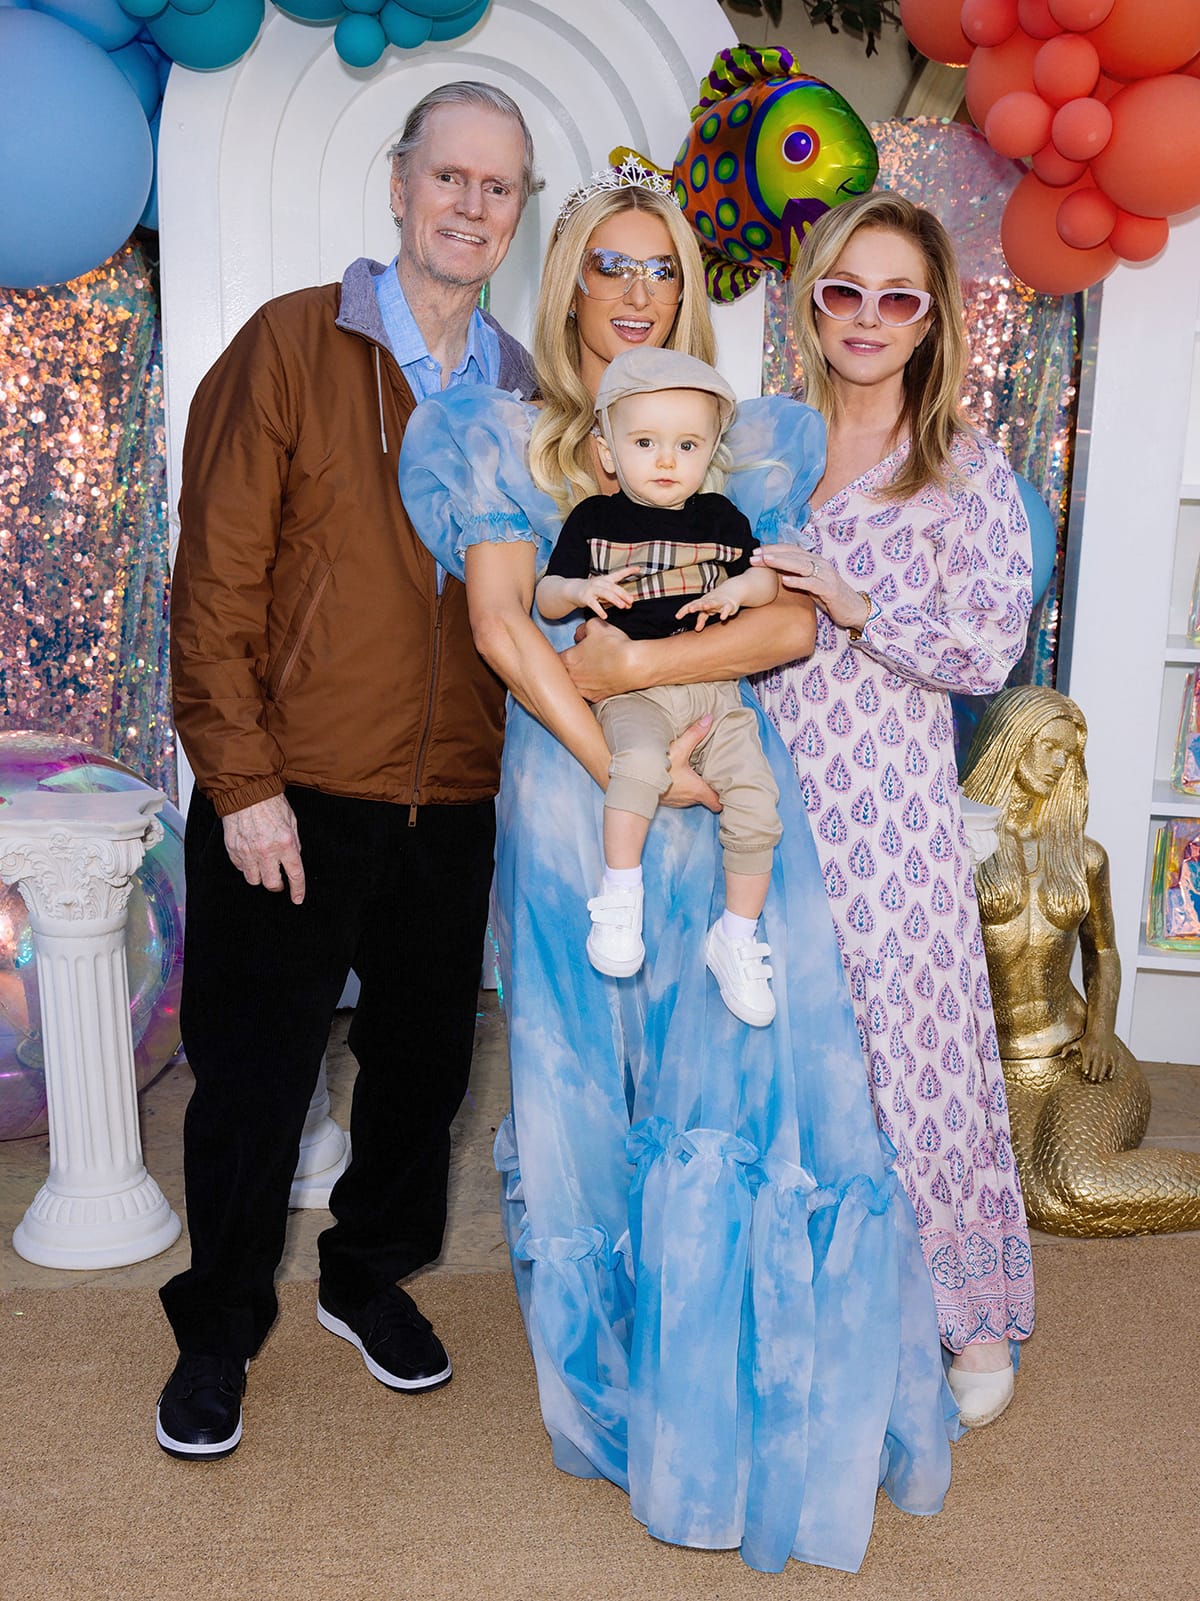 Paris Hilton and her son Phoenix take a photo with her parents Rick and Kathy Hilton